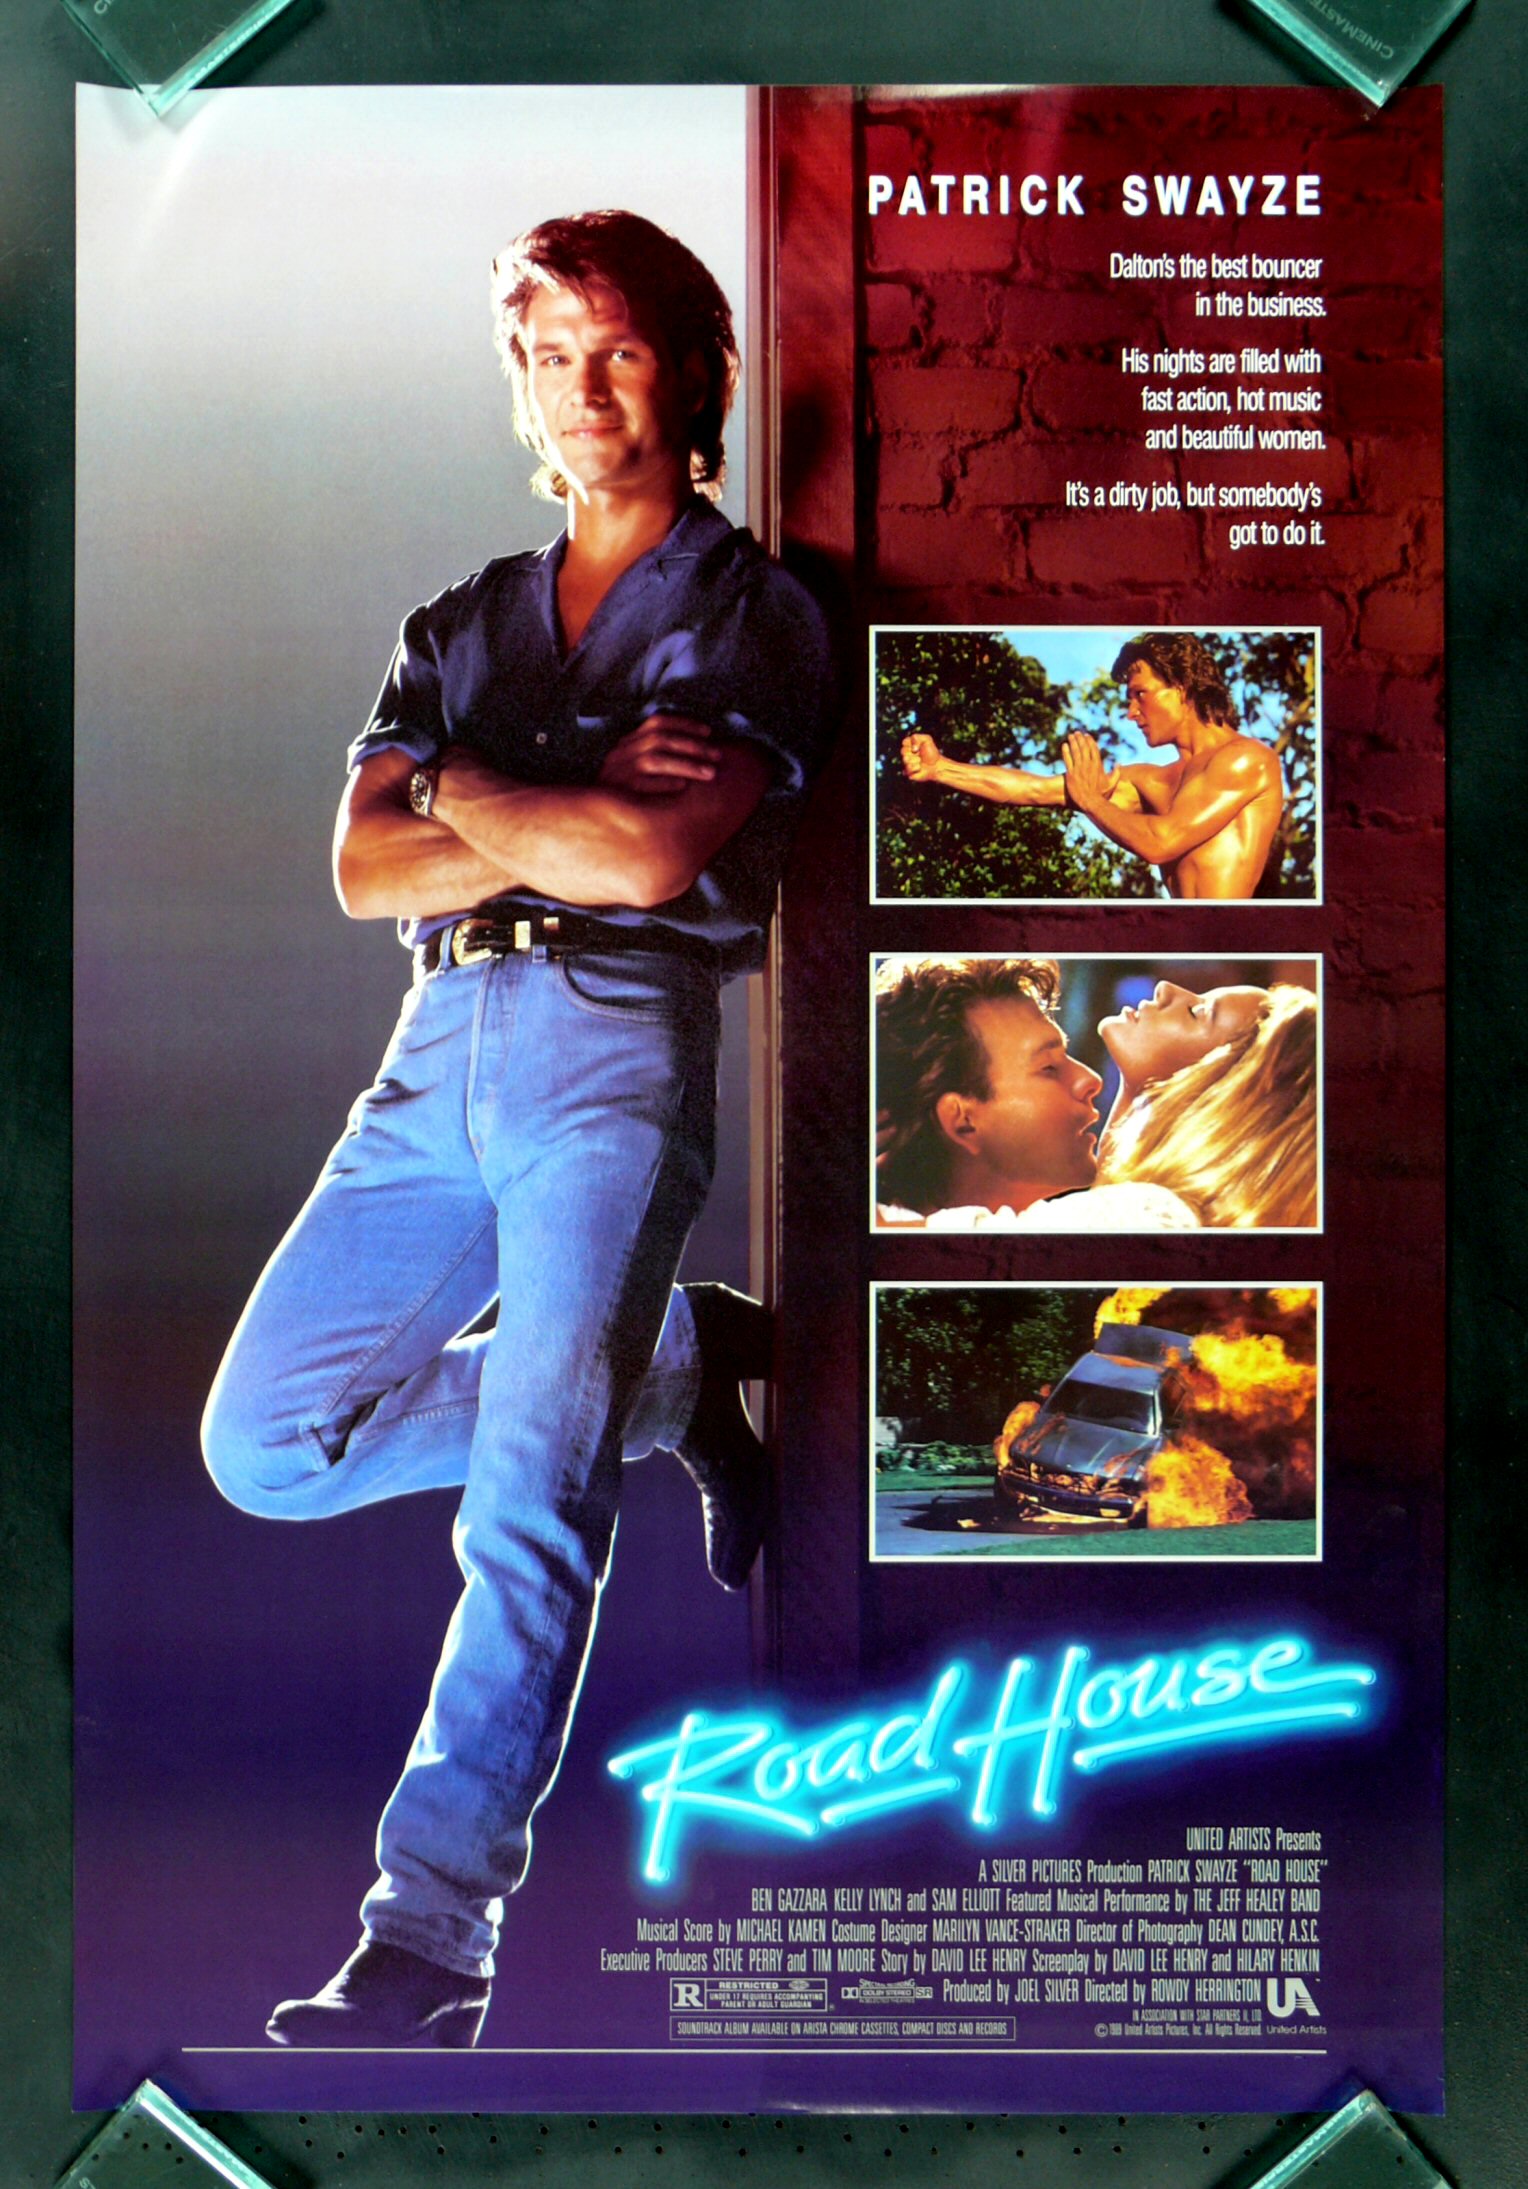 Road House #2